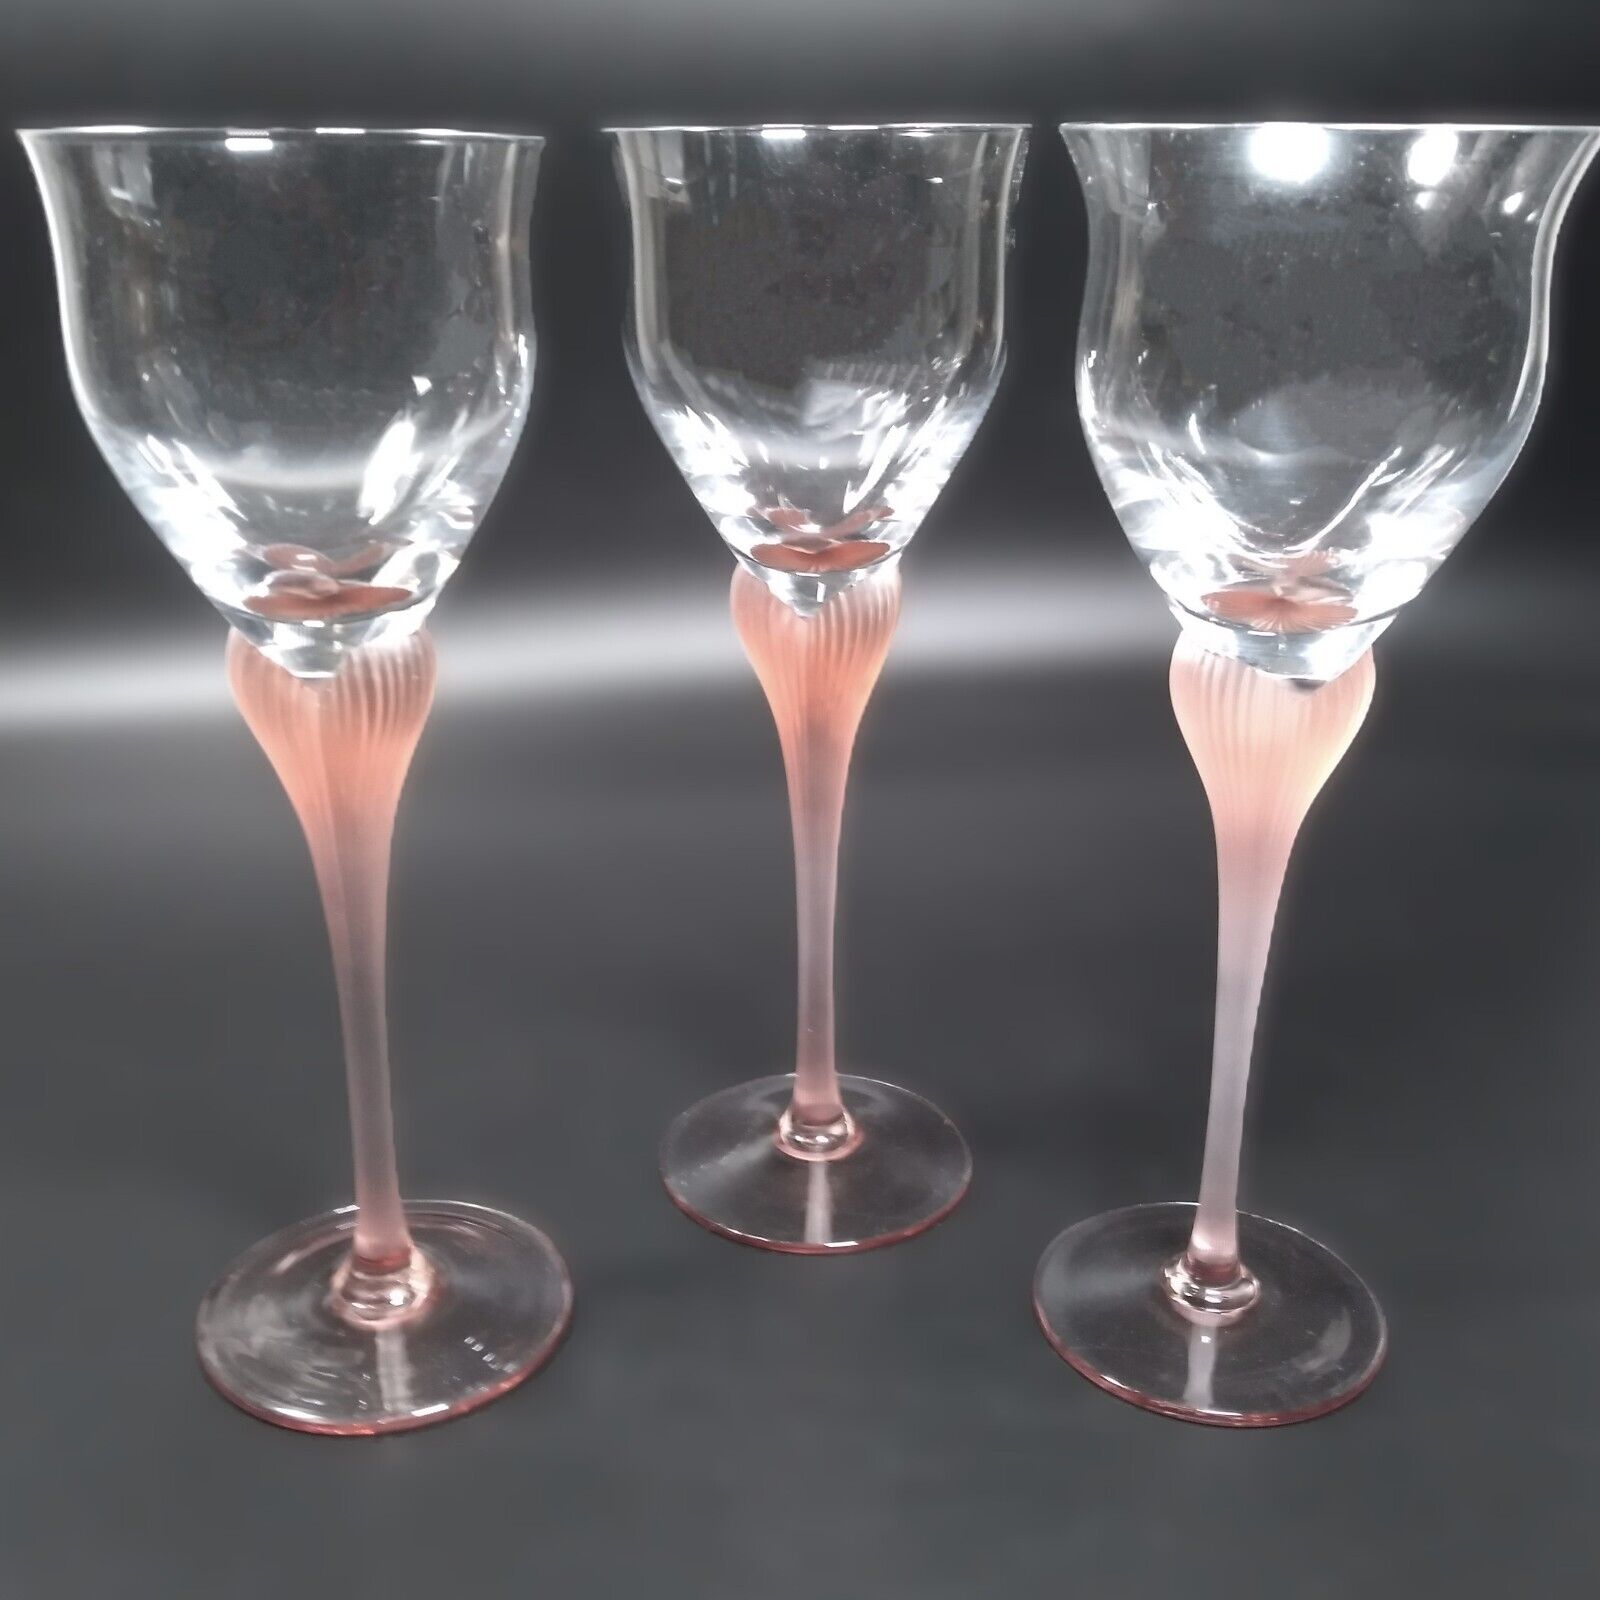 3 Mikasa Sea Mist Coral Stem Wine Goblets Glasses Frosted Ribbed 8.3 Inches